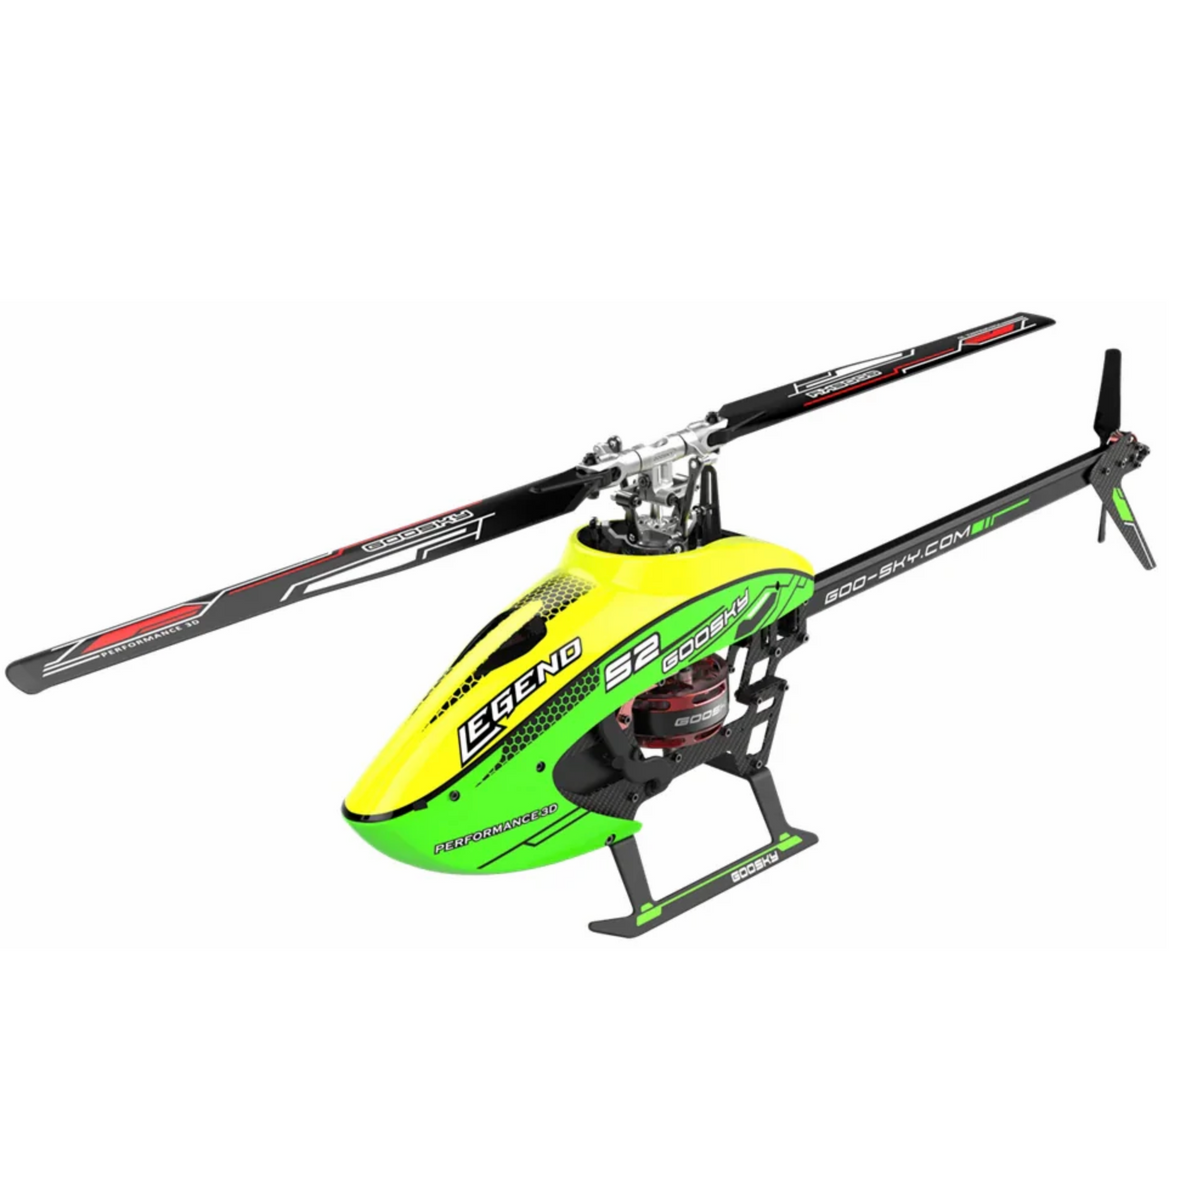 Goo-Sky Legend S2 Helicopter Kit (BNF) - Green/Yellow